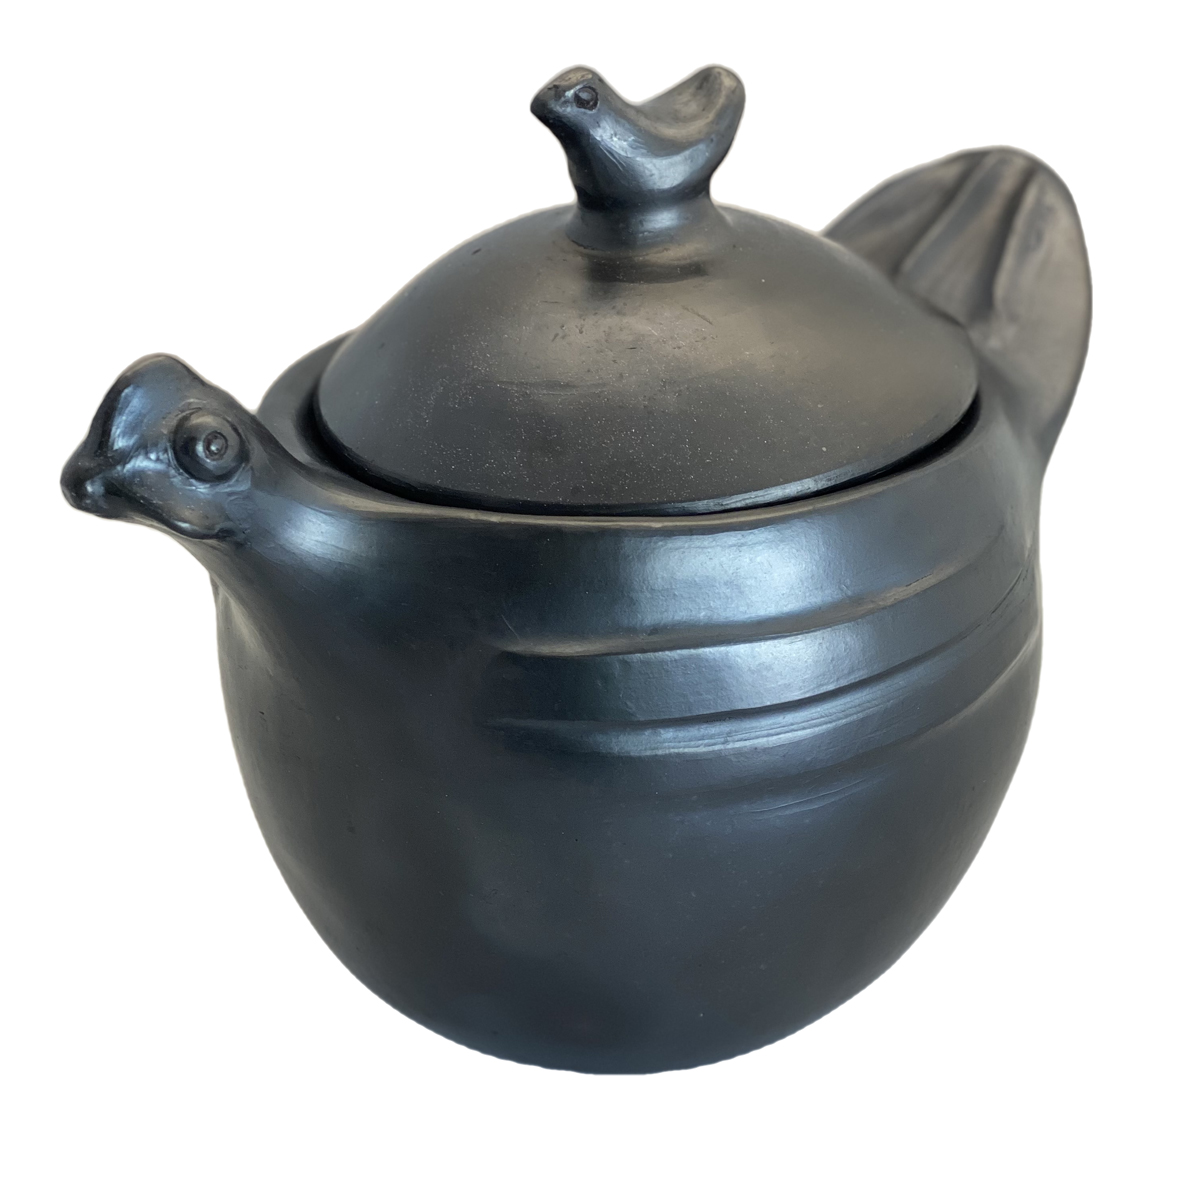 https://ancientcookware.com/images/stories/virtuemart/product/col_1111_10_03_large.jpg